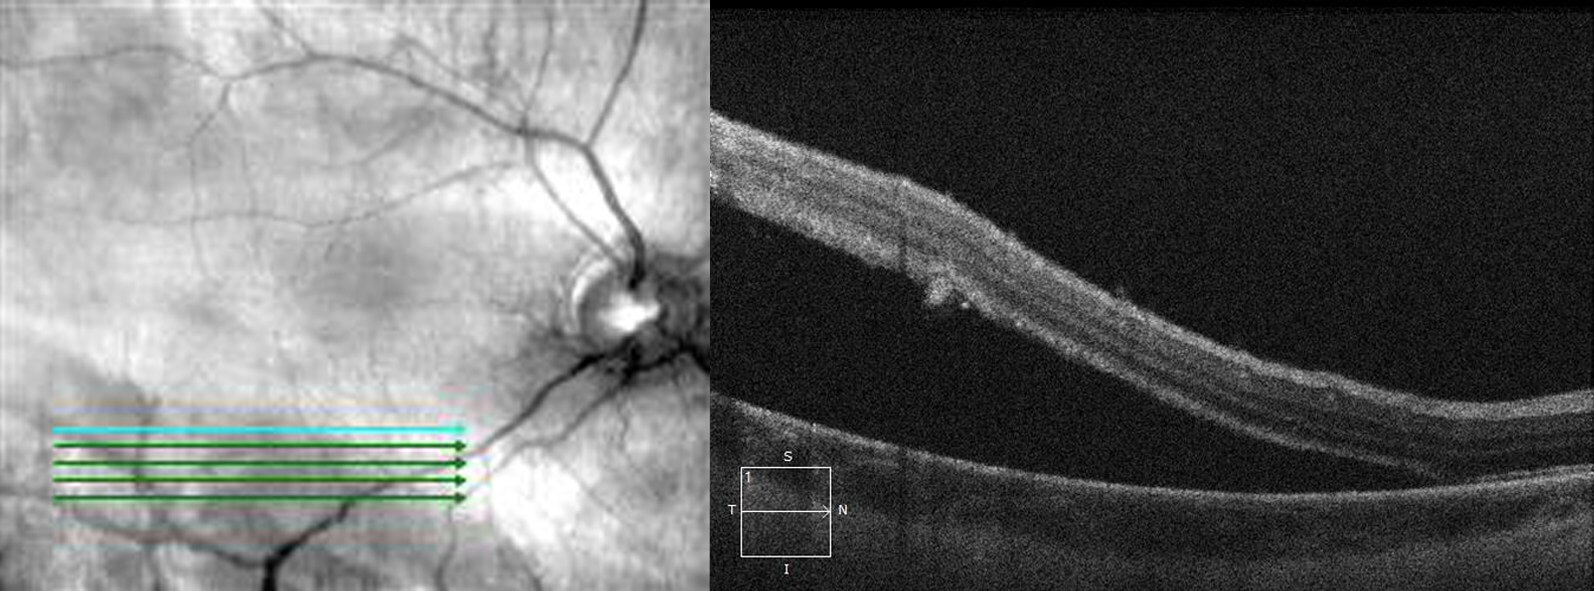 Optical coherence tomography through the inferior right posterior pole demonstrates the retinal detachment.